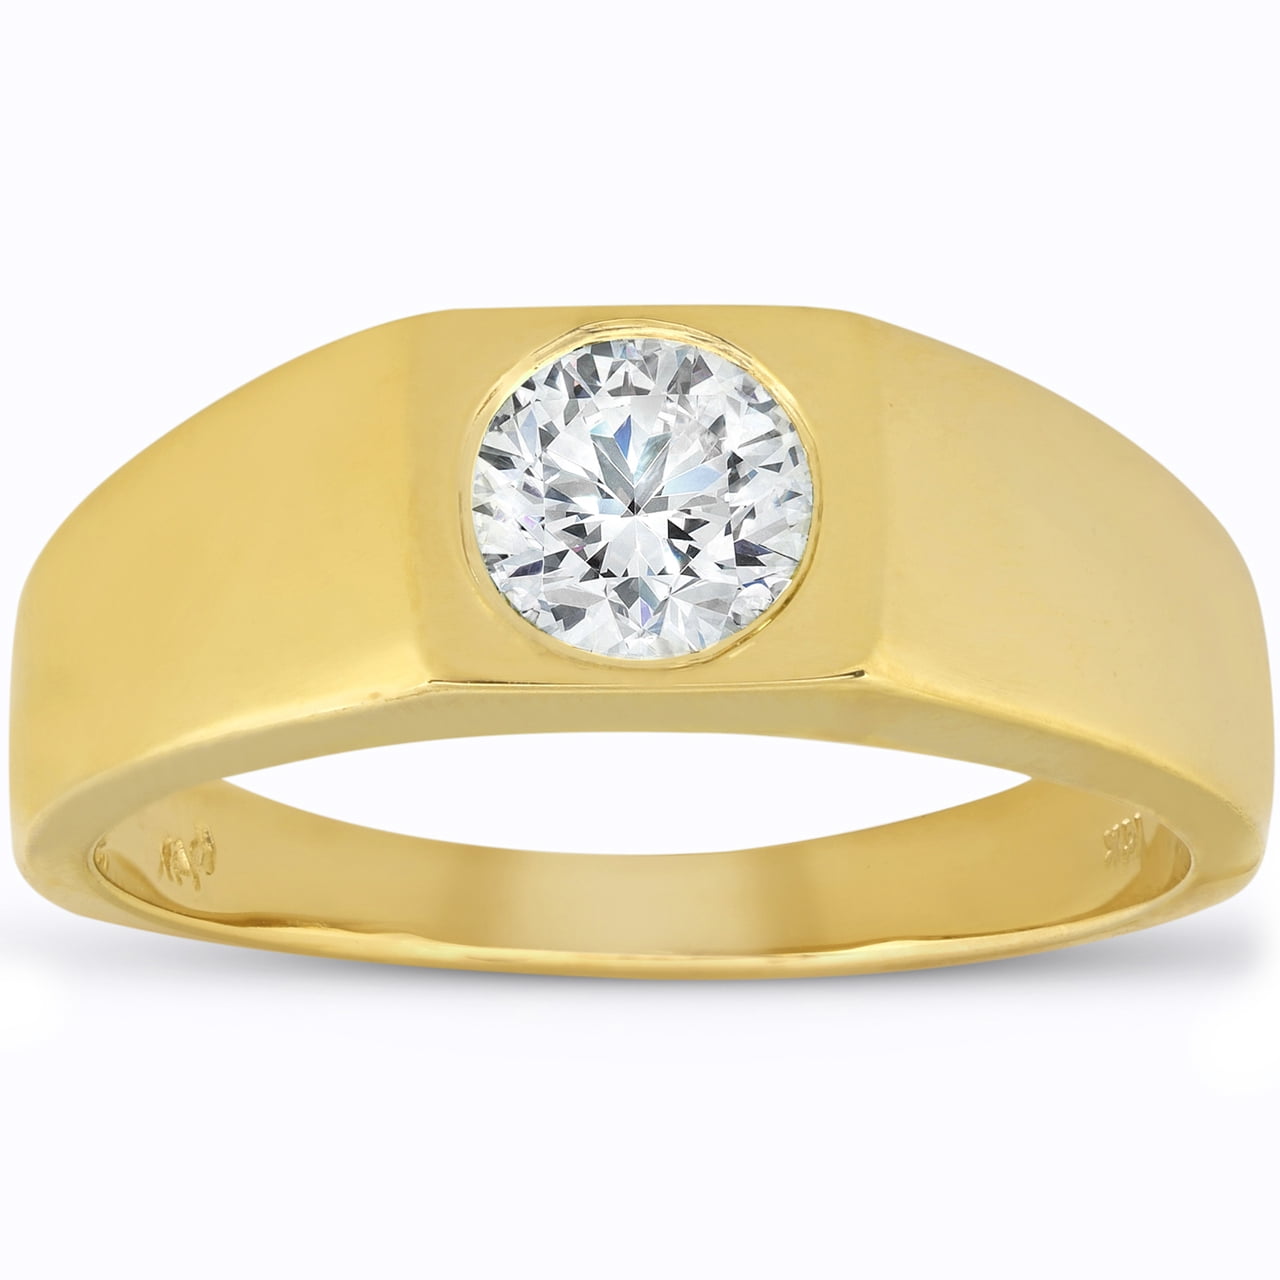 Round Cut Diamond Engagement Ring 14K Solid Yellow Gold Solitaire Bridal 1 Ct 